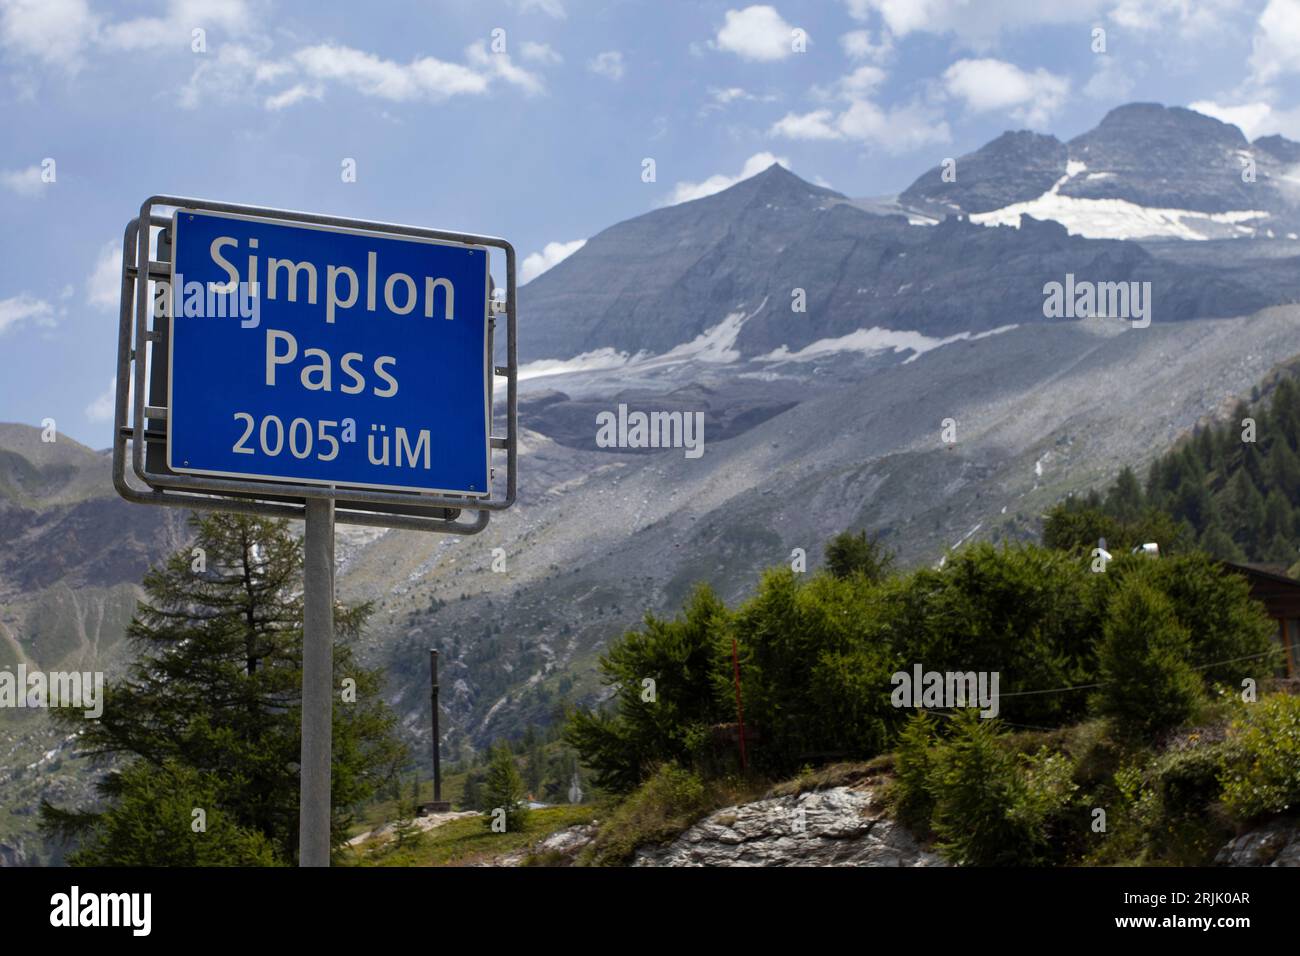 Road sign for the famous Simplon Pass in Switzerland, with height information and a background of mountains. Copy space to the right. Stock Photo